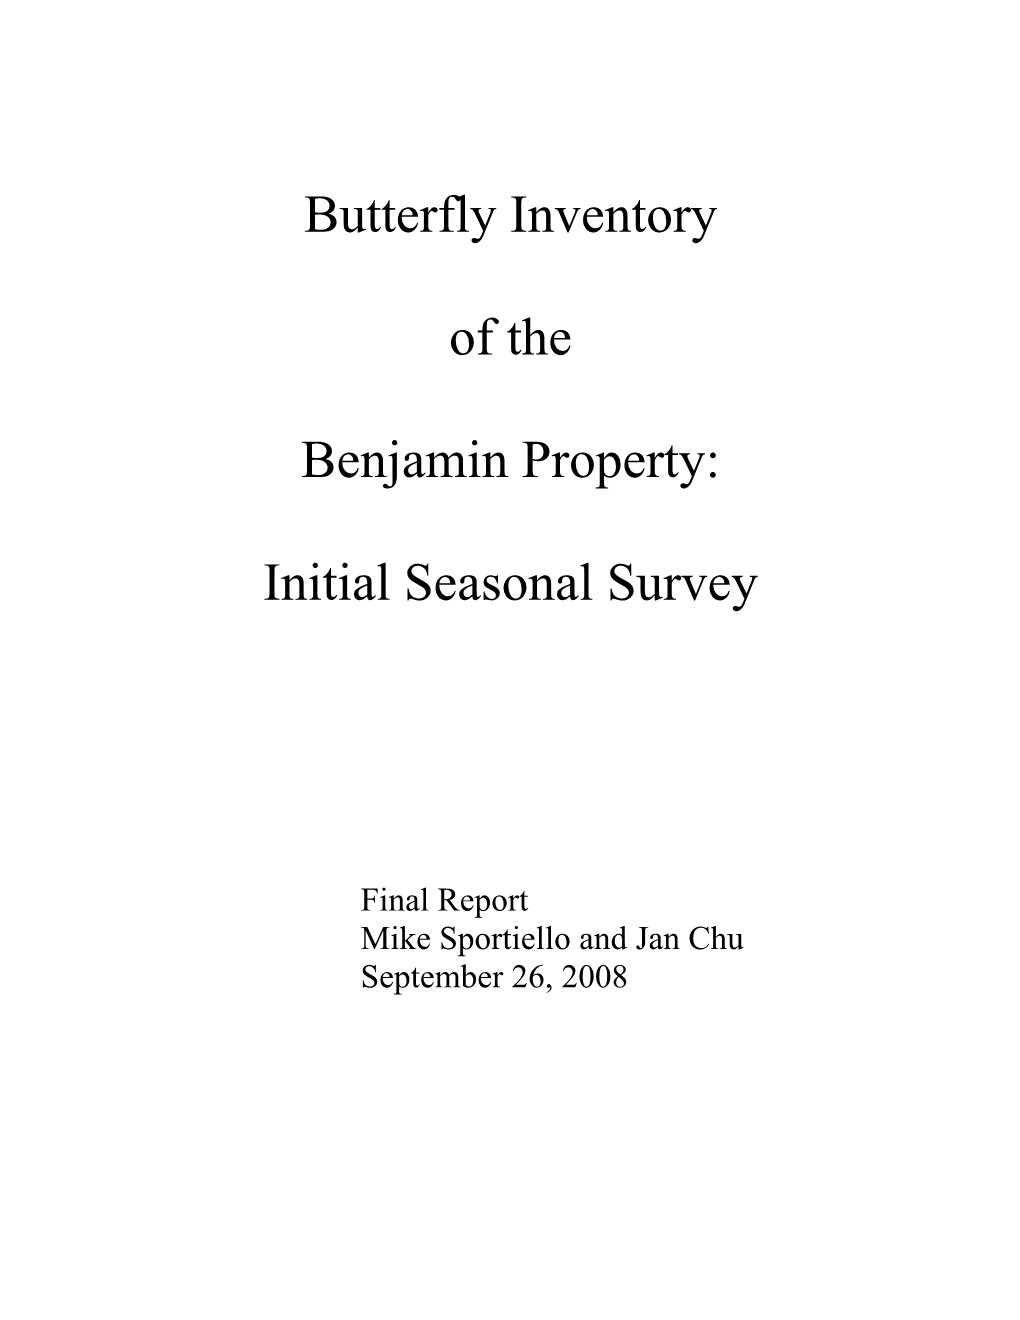 Butterfly Inventory of the Benjamin Property